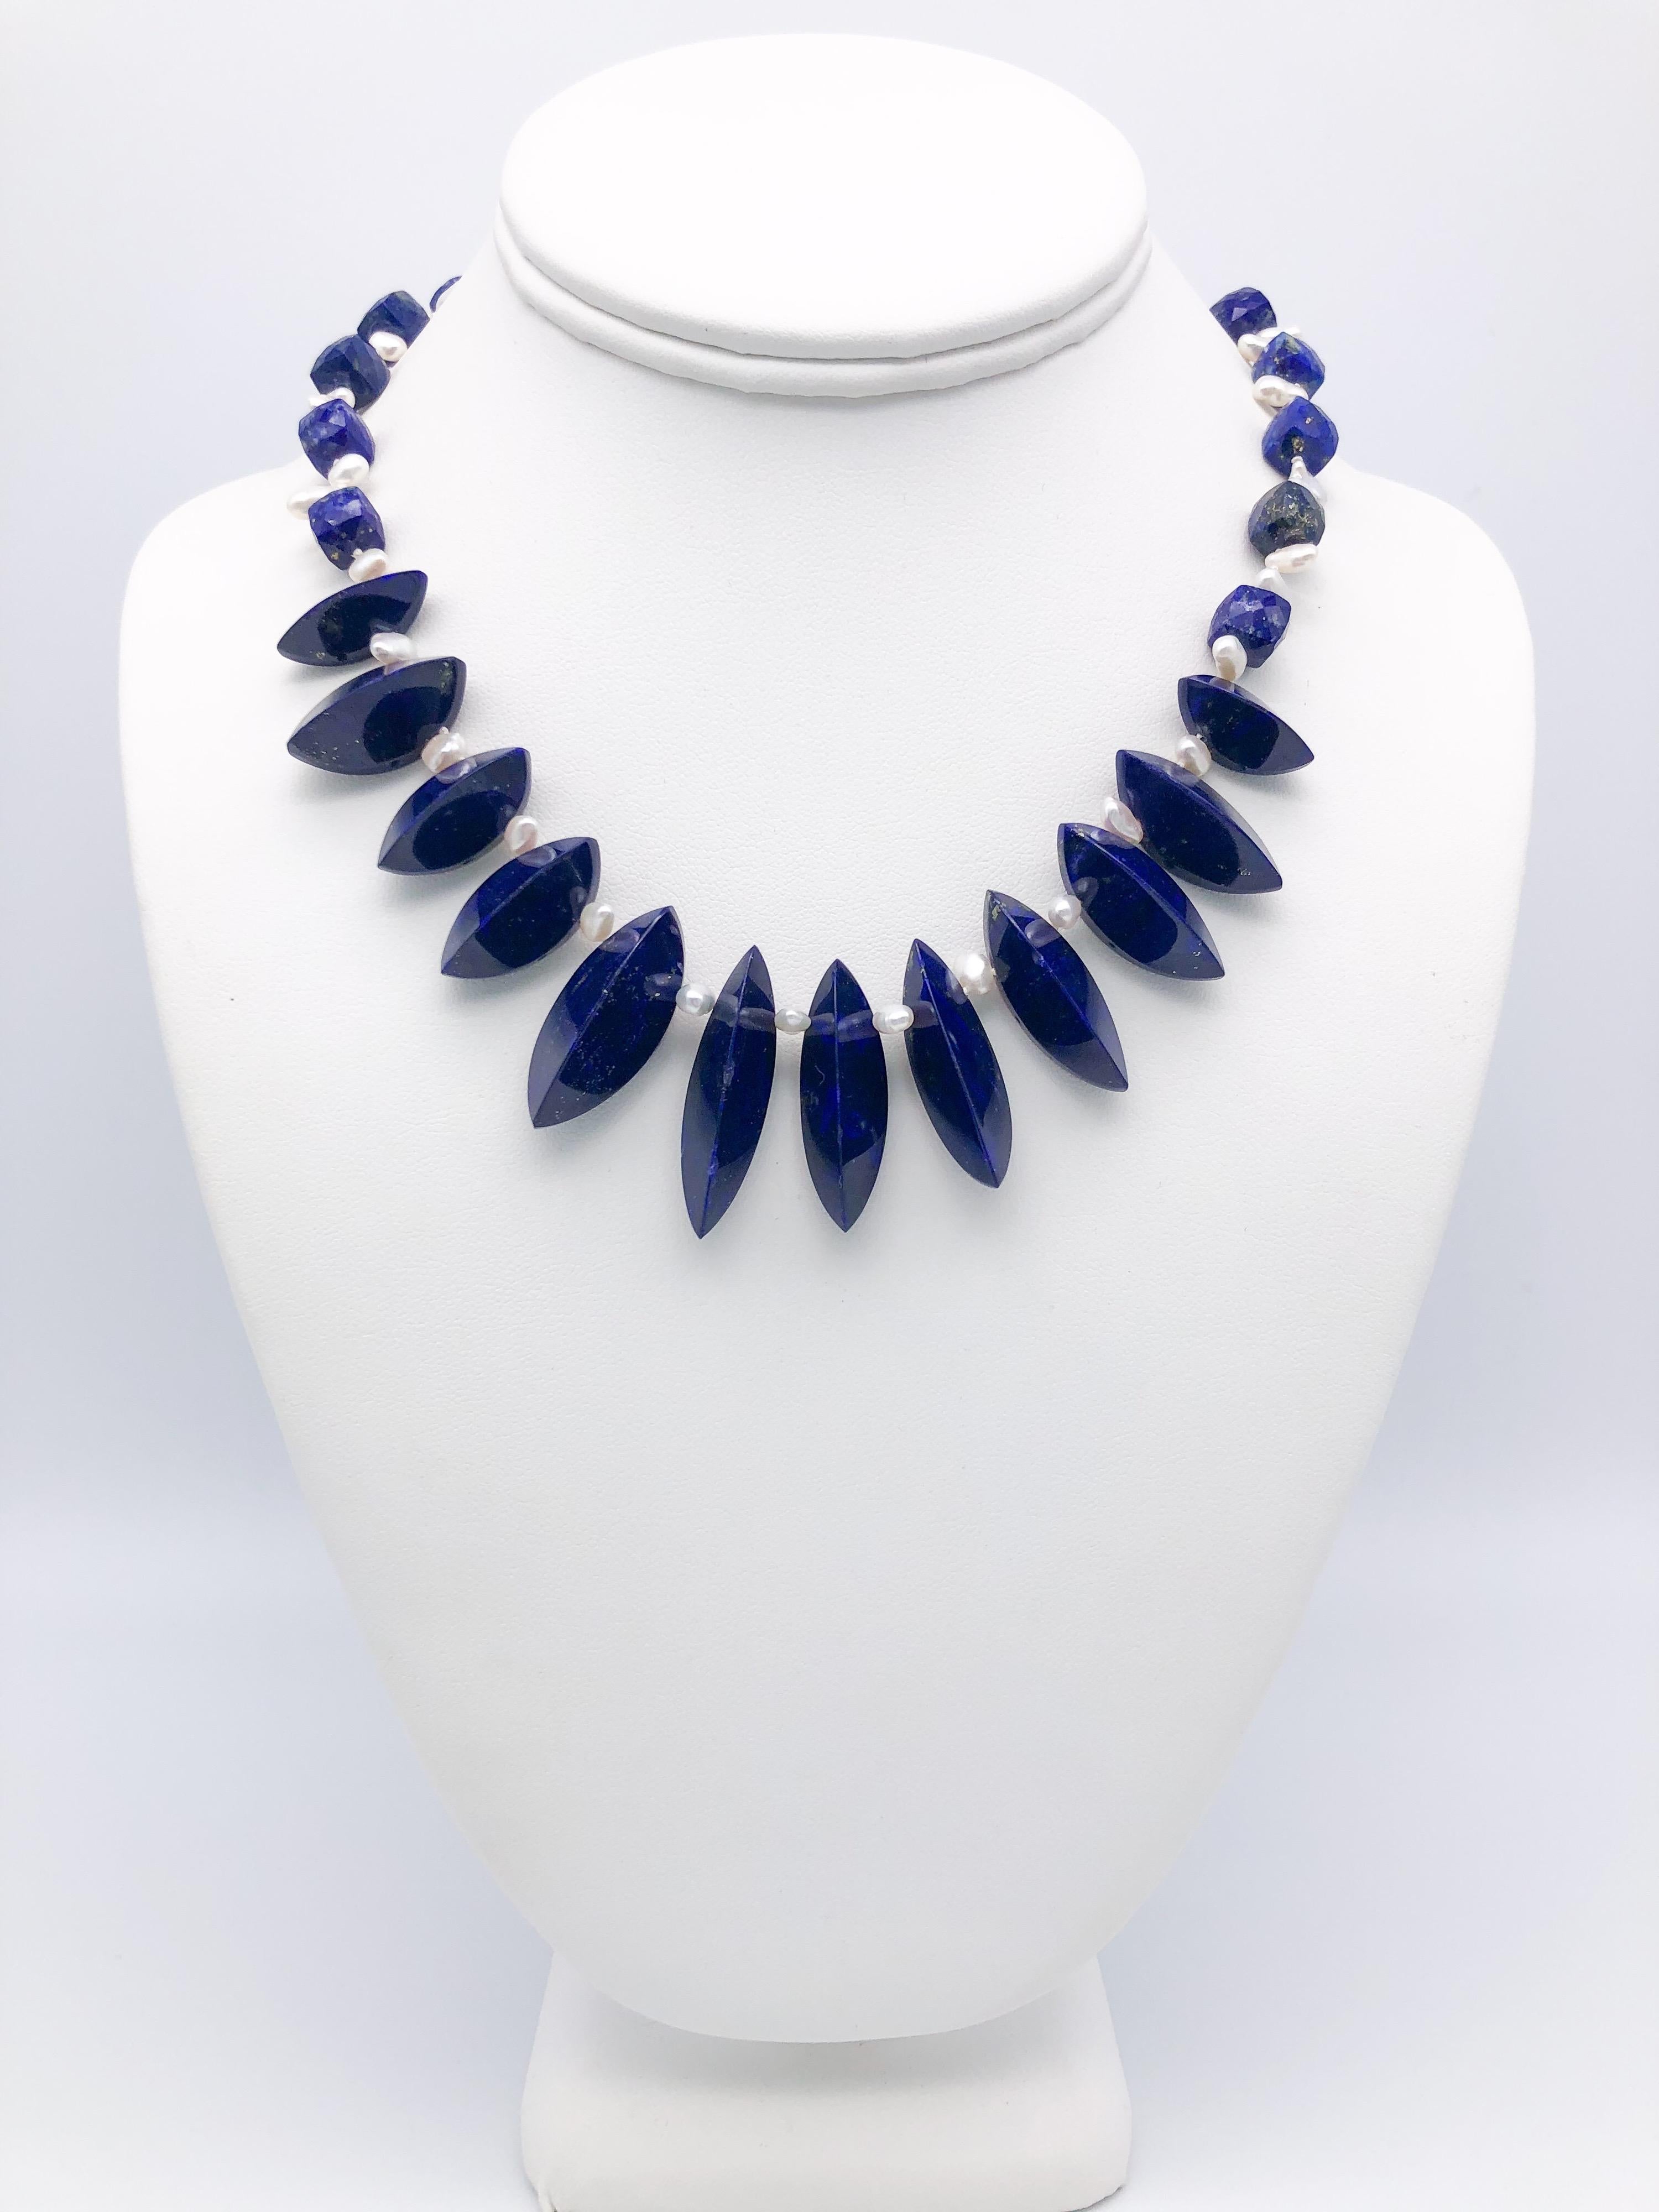 Contemporary A.Jeschel Unusually cut Lapis beads are strung in a flattering necklace. For Sale